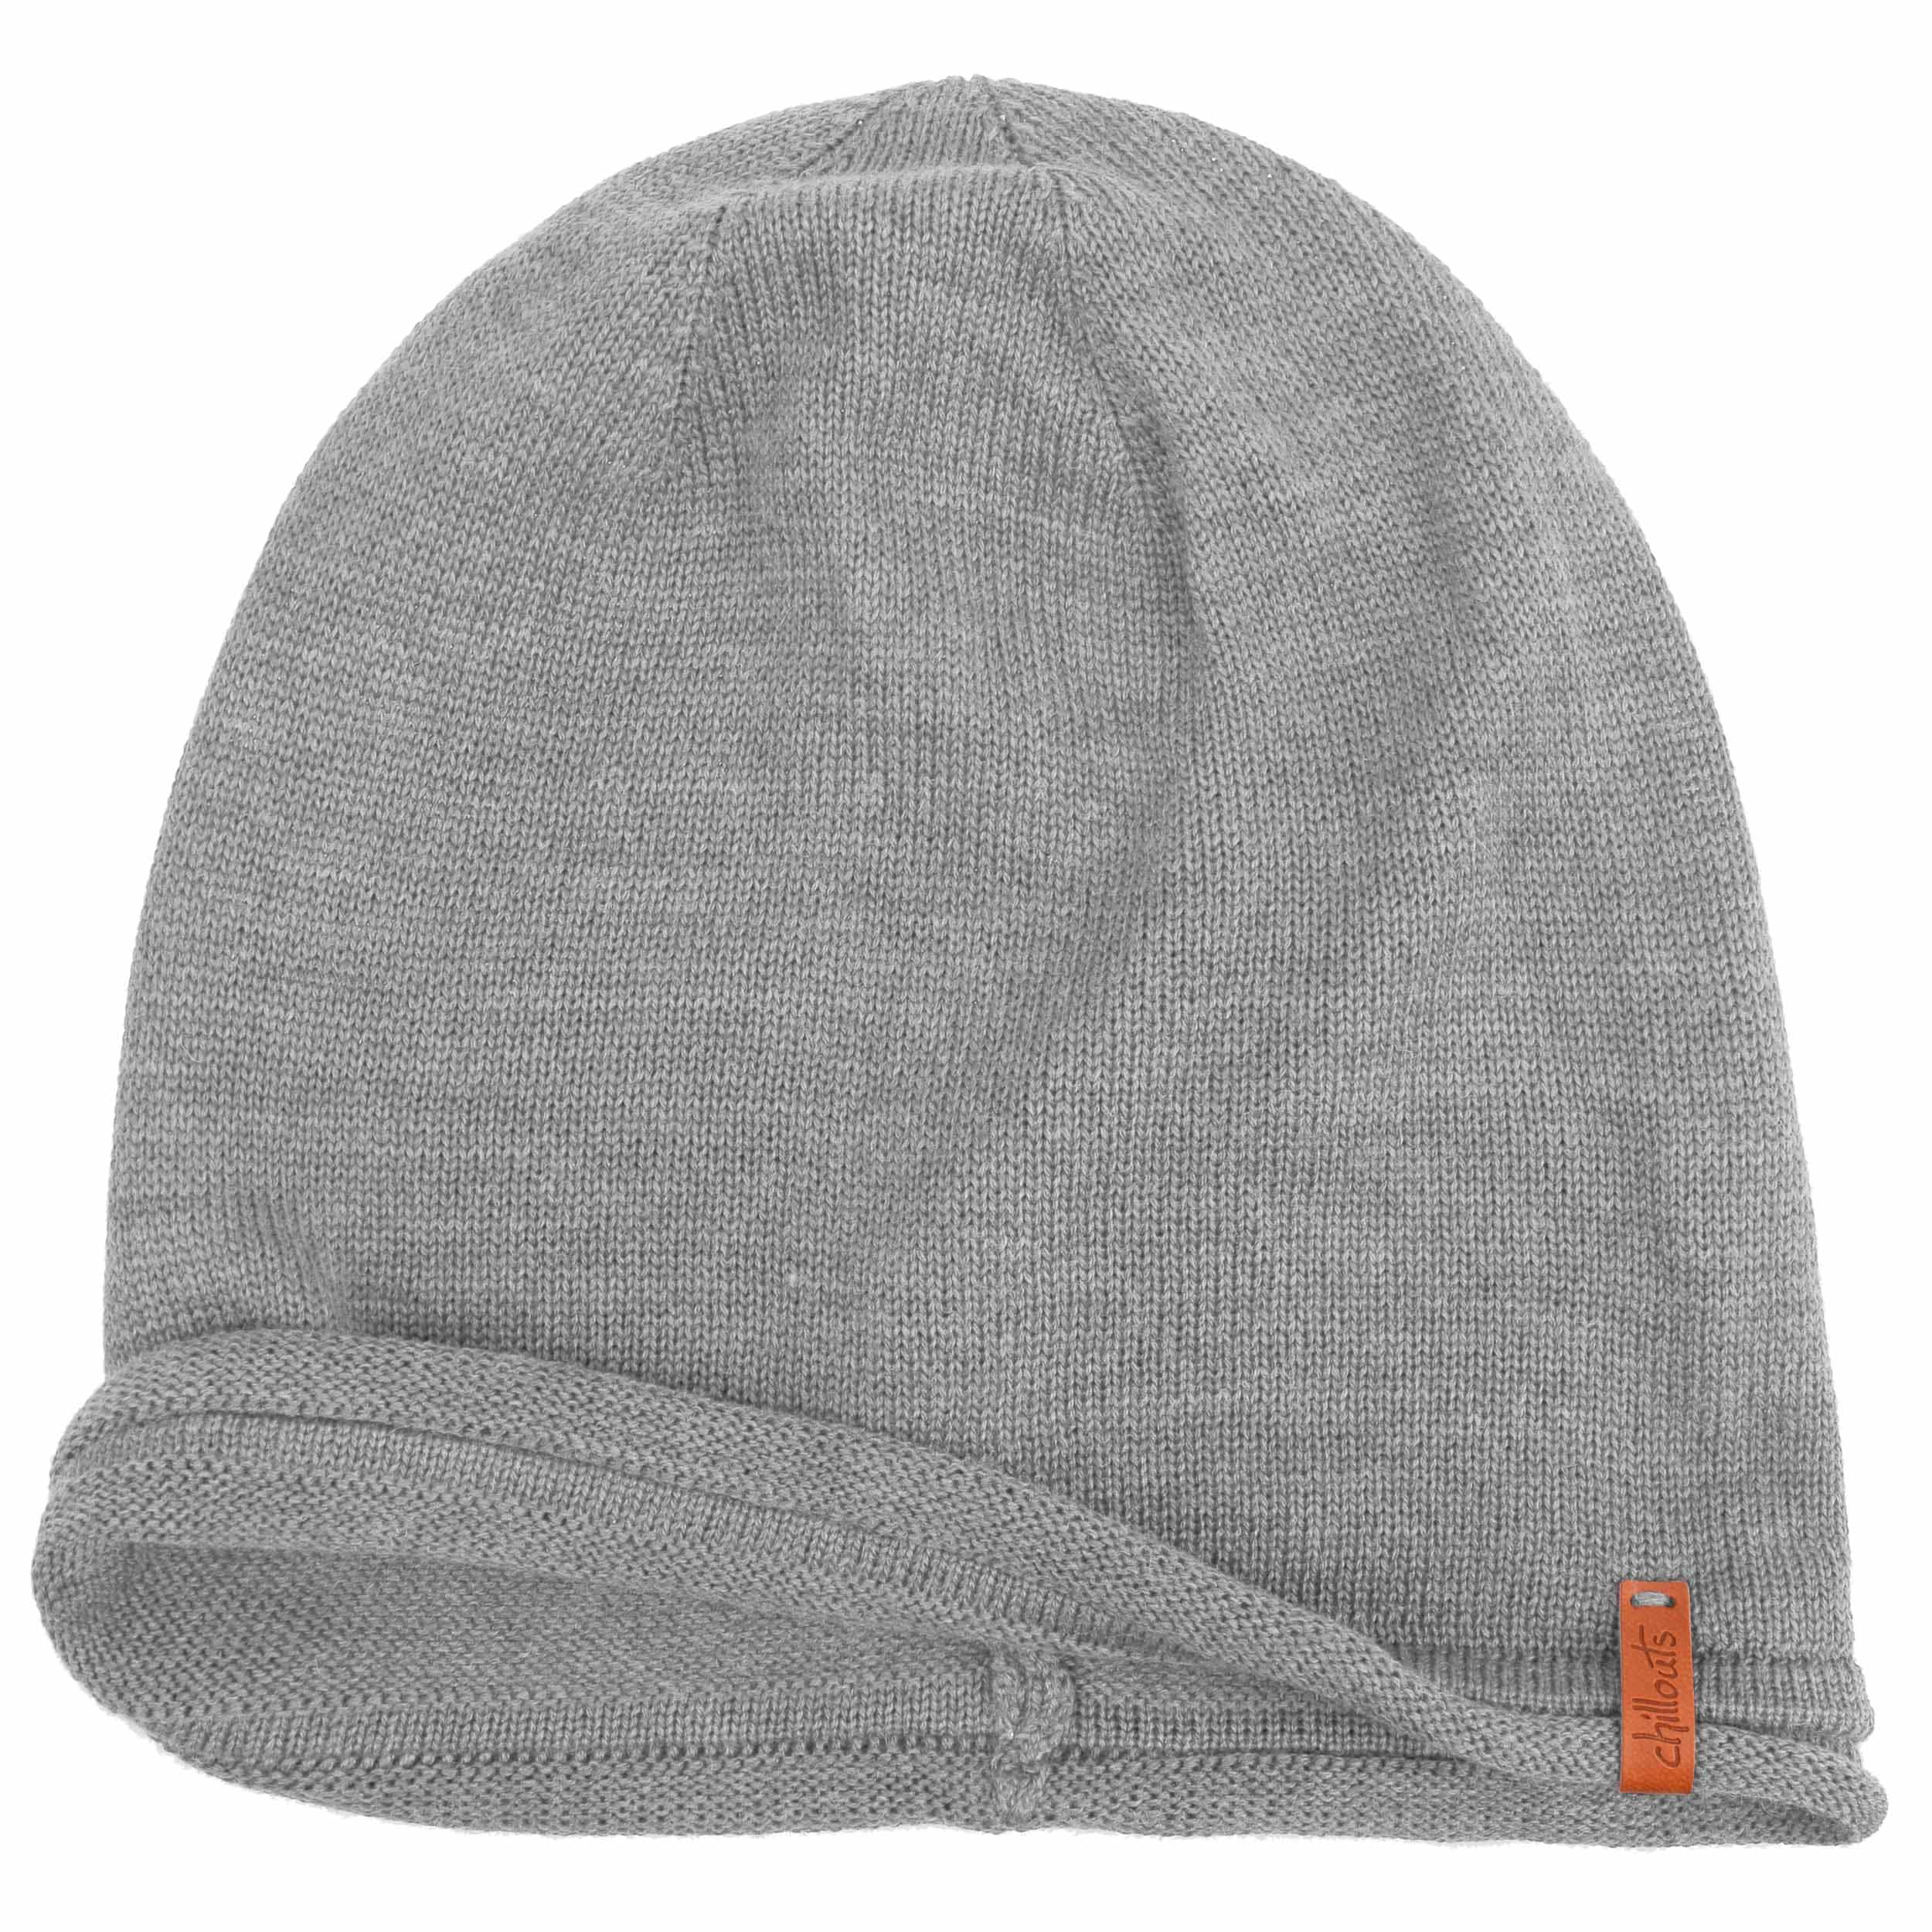 Leicester Oversize 29,95 € Chillouts Beanie - by